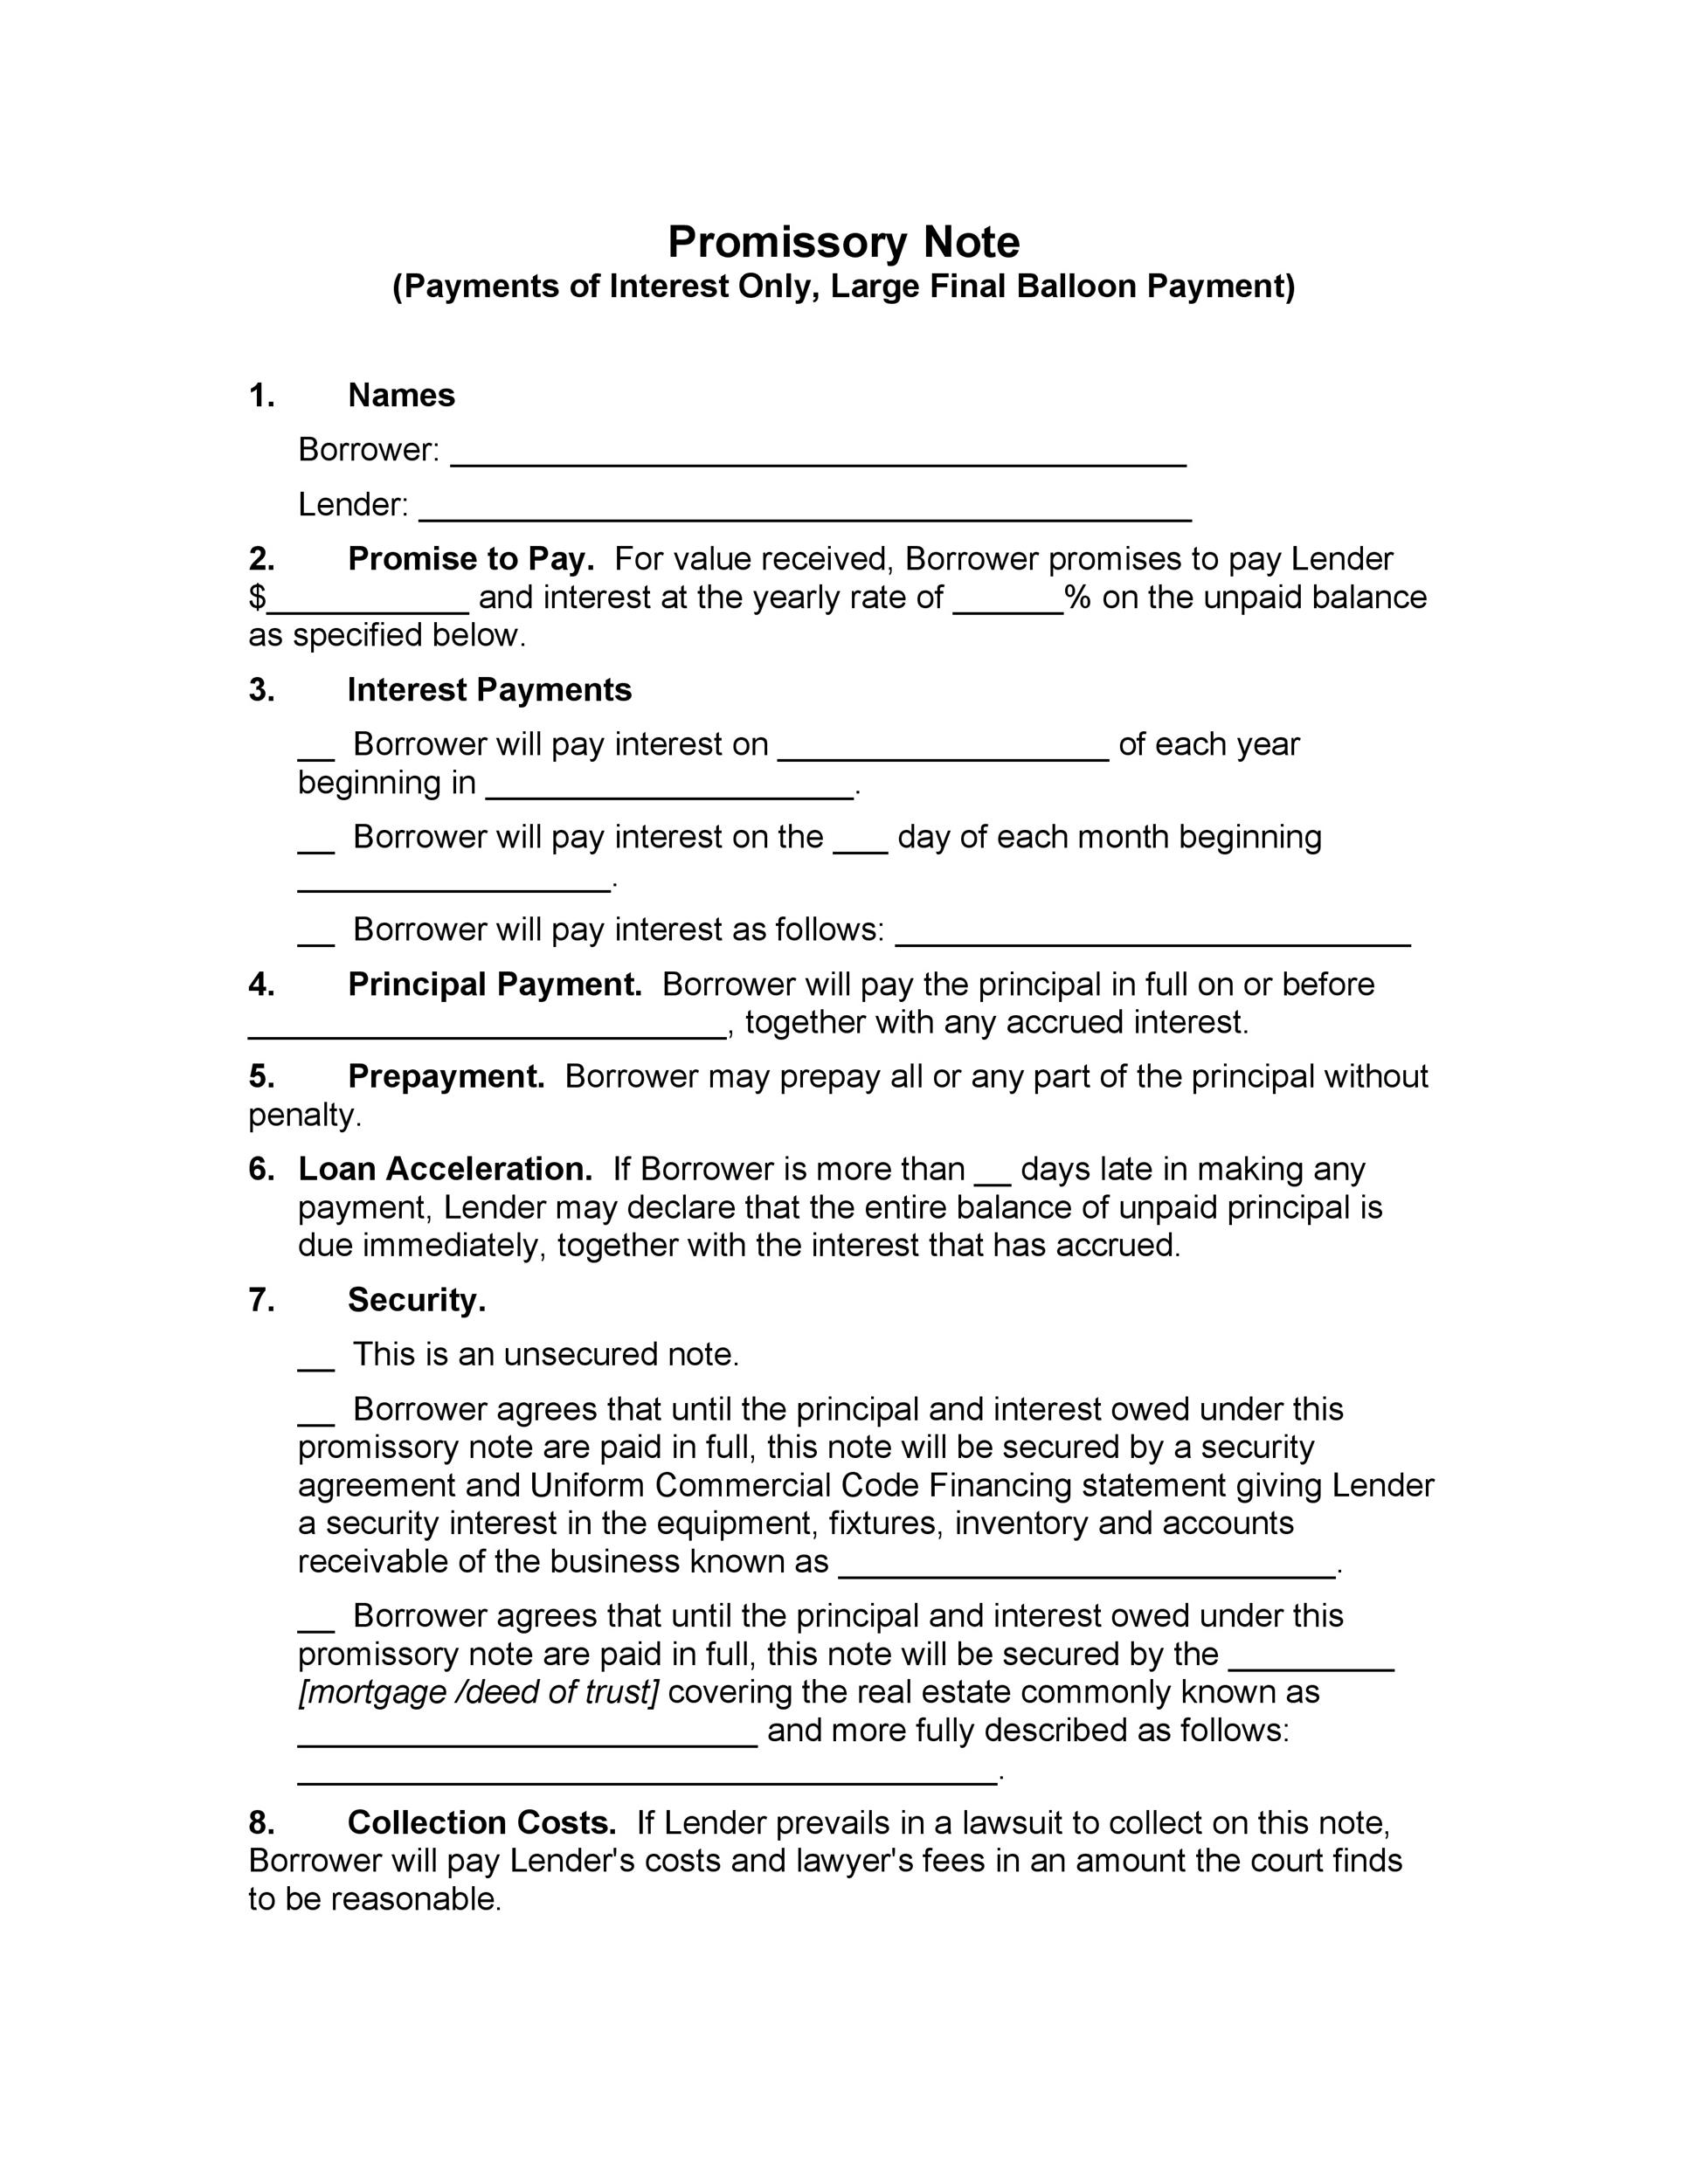 Free promissory note template 25